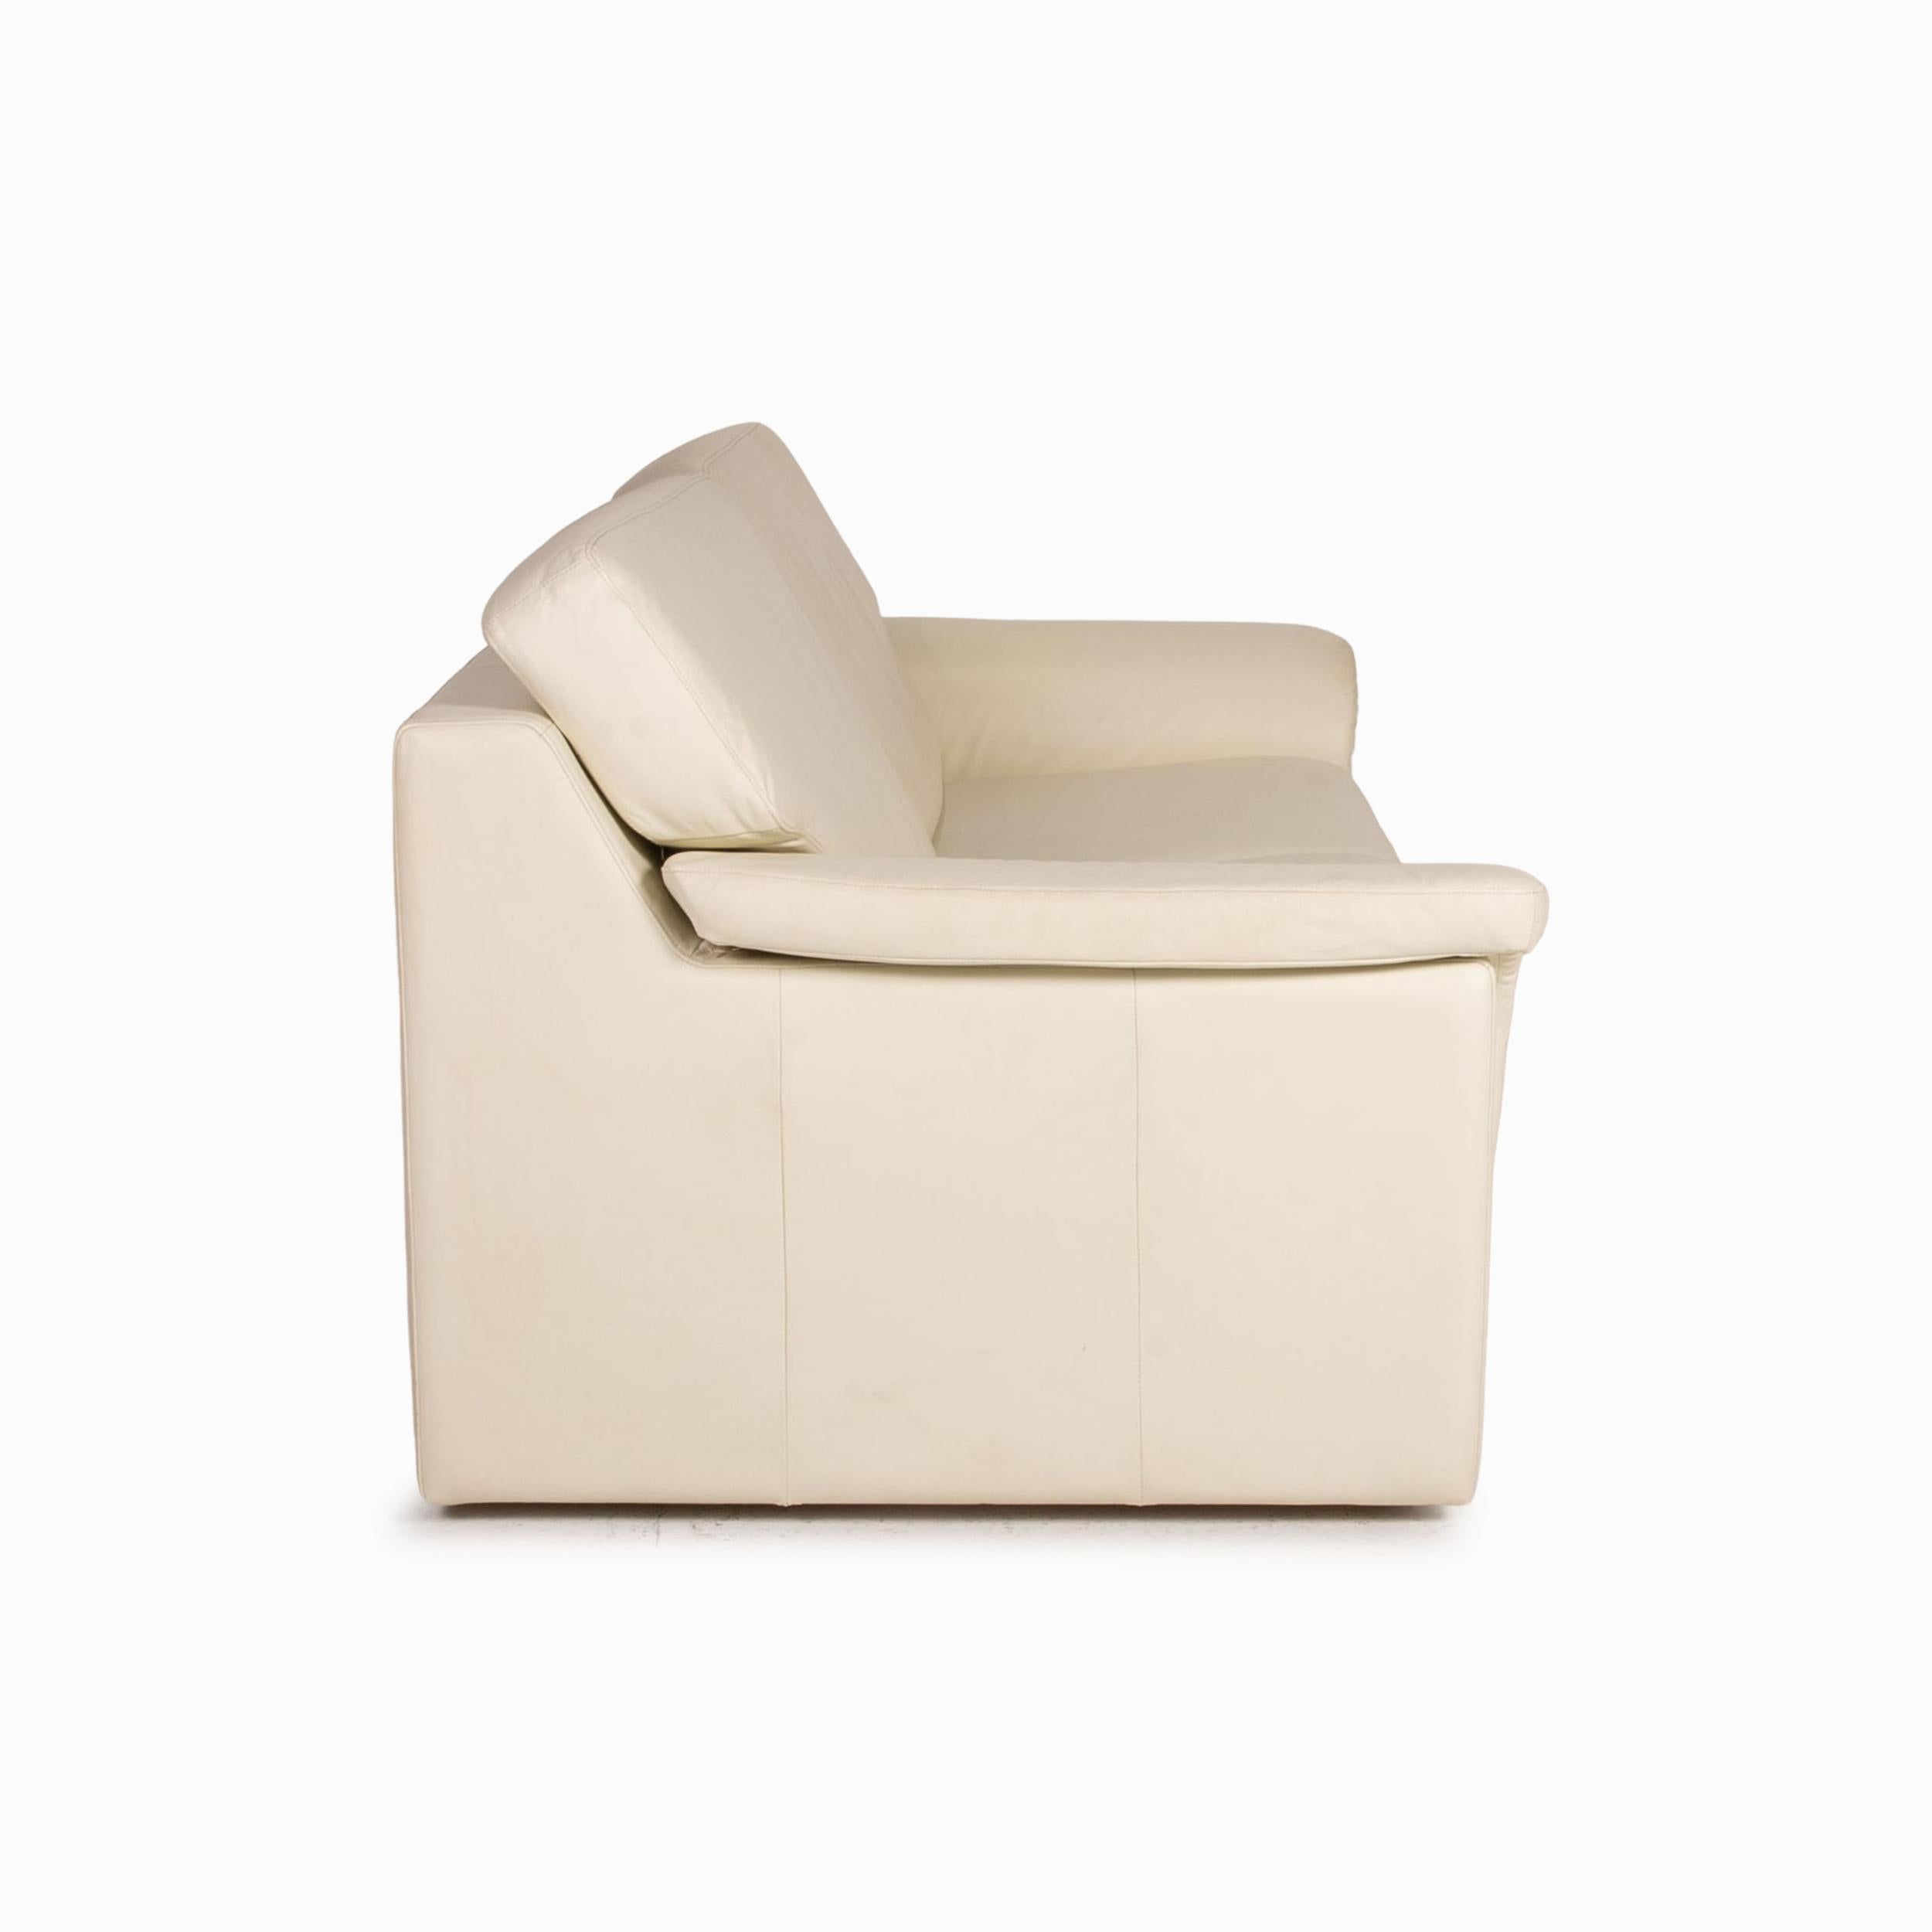 European Musterring Leather Sofa Bed Cream Two-Seater Function Sleeping Function Couch For Sale